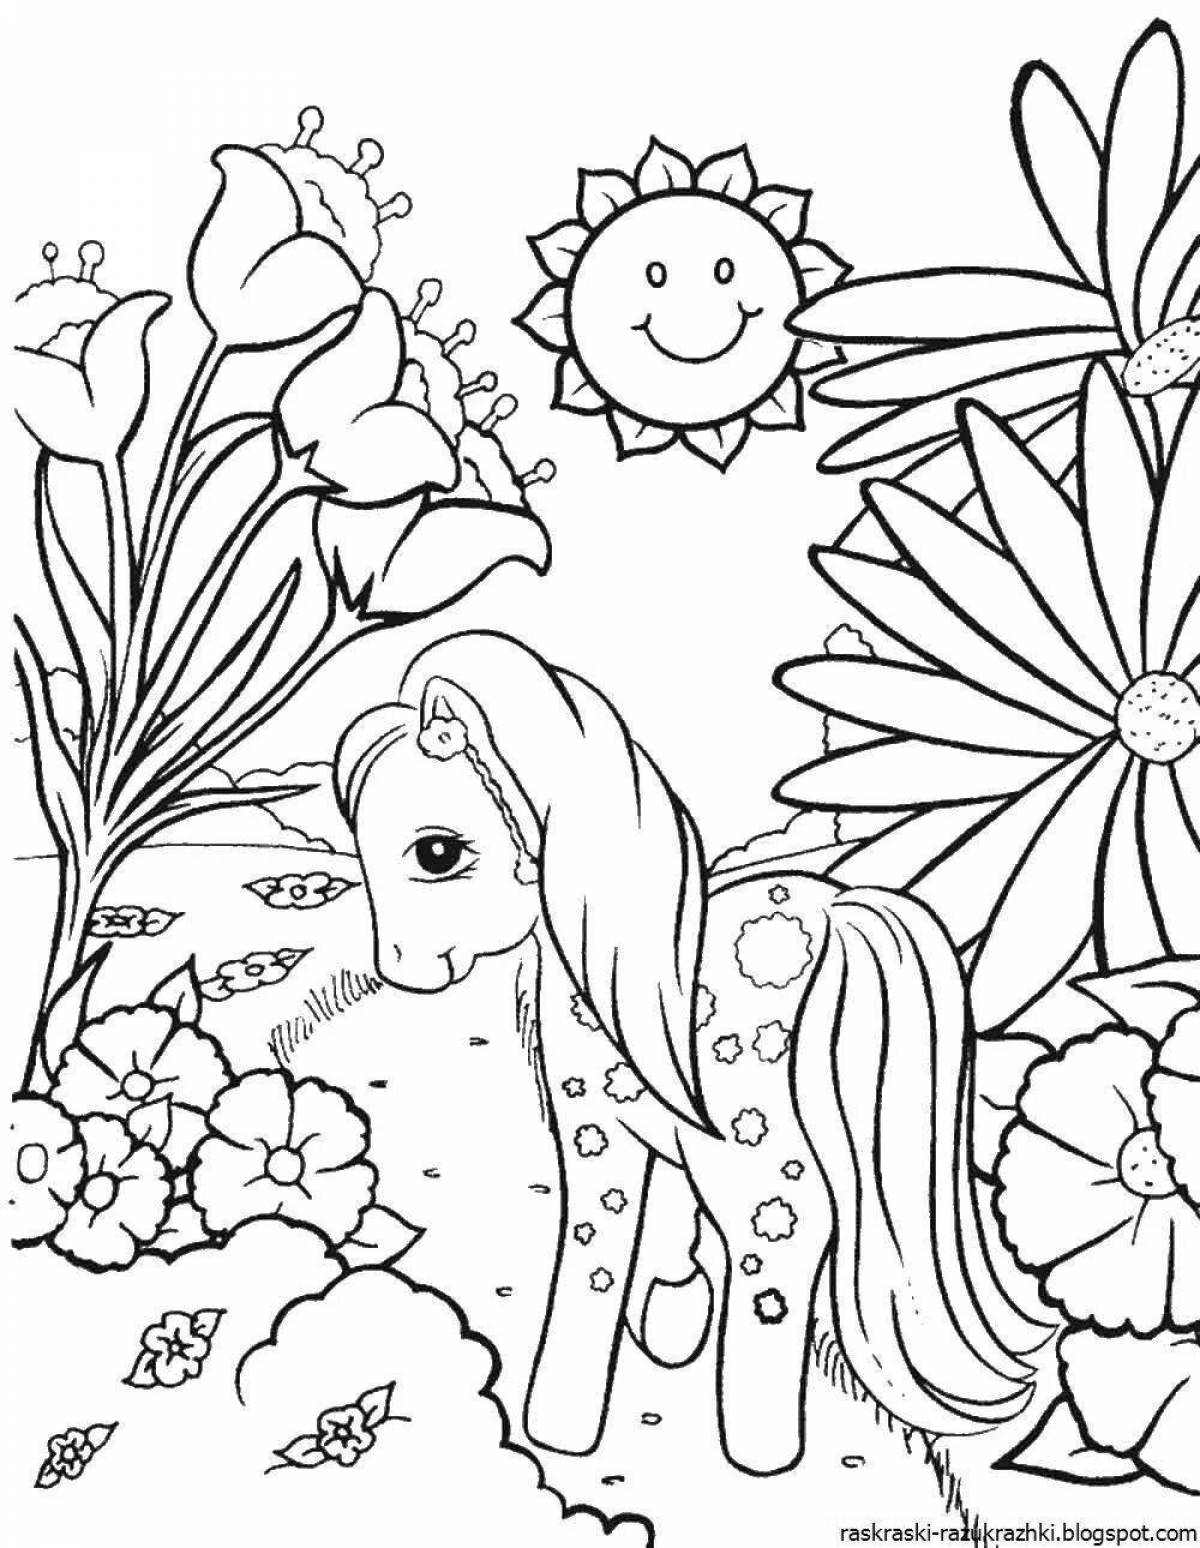 Glitter coloring book for 6 year old girls